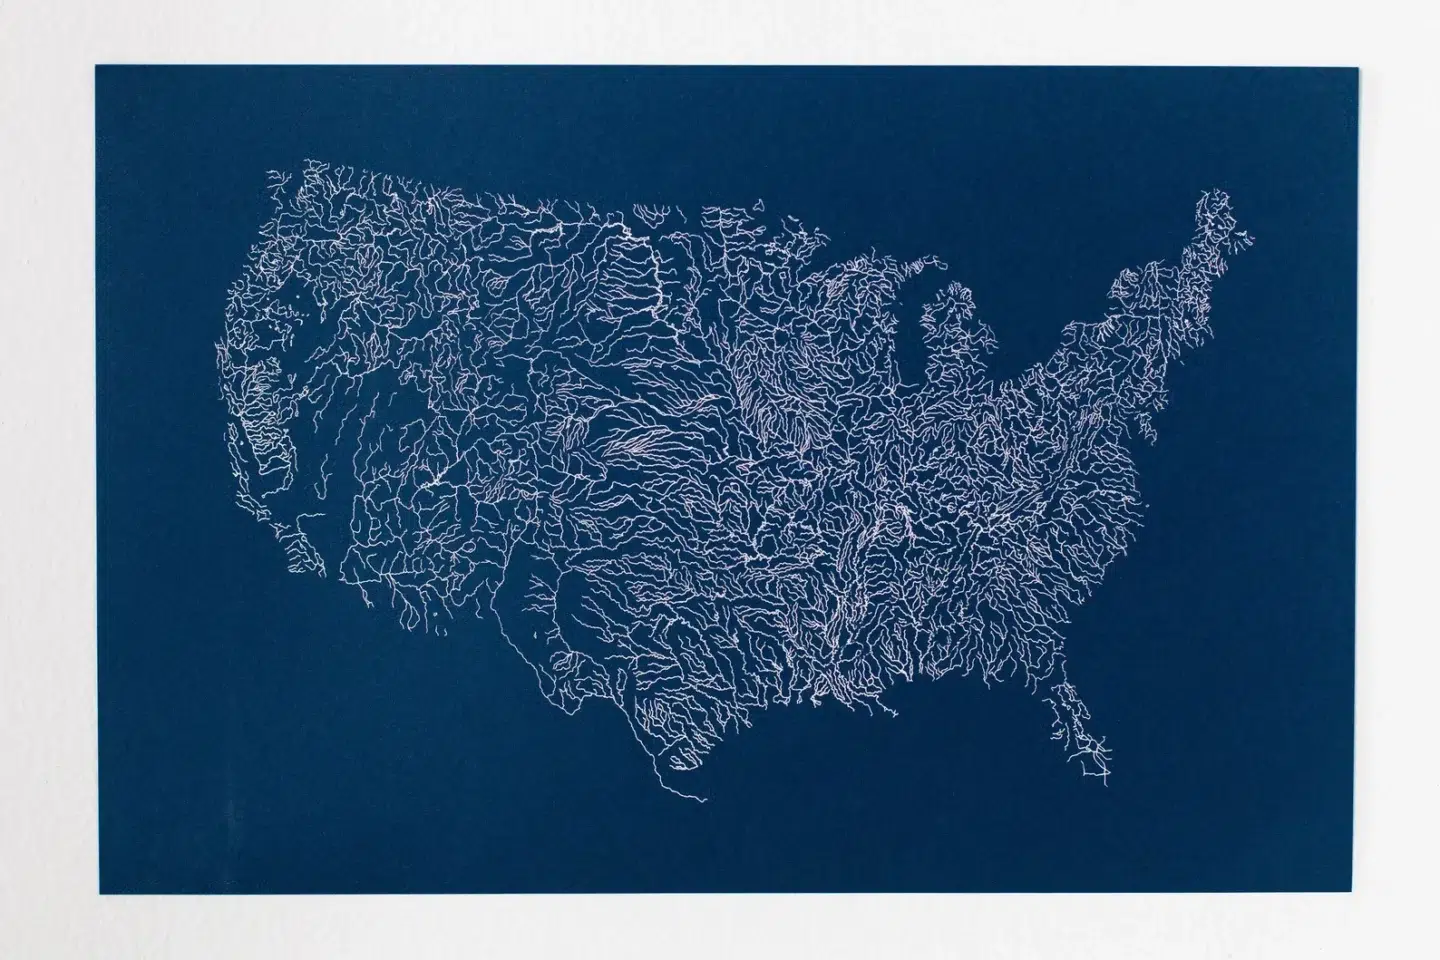 Artwork of the rivers across the United States. US River cruises are plentiful. Artwork by The Far Woods on Etsy.